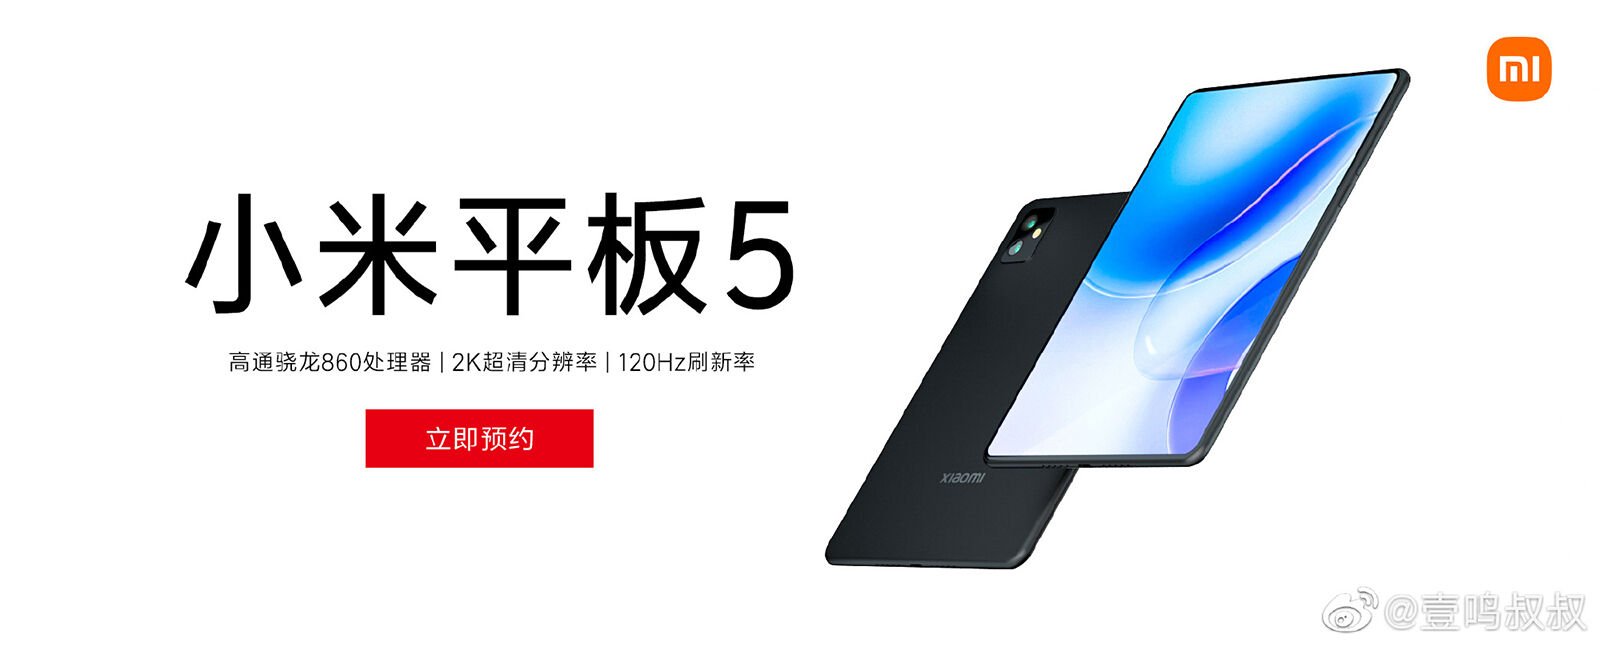 Xiaomi Mi Pad 5 spotted on Geekbench, key specifications revealed